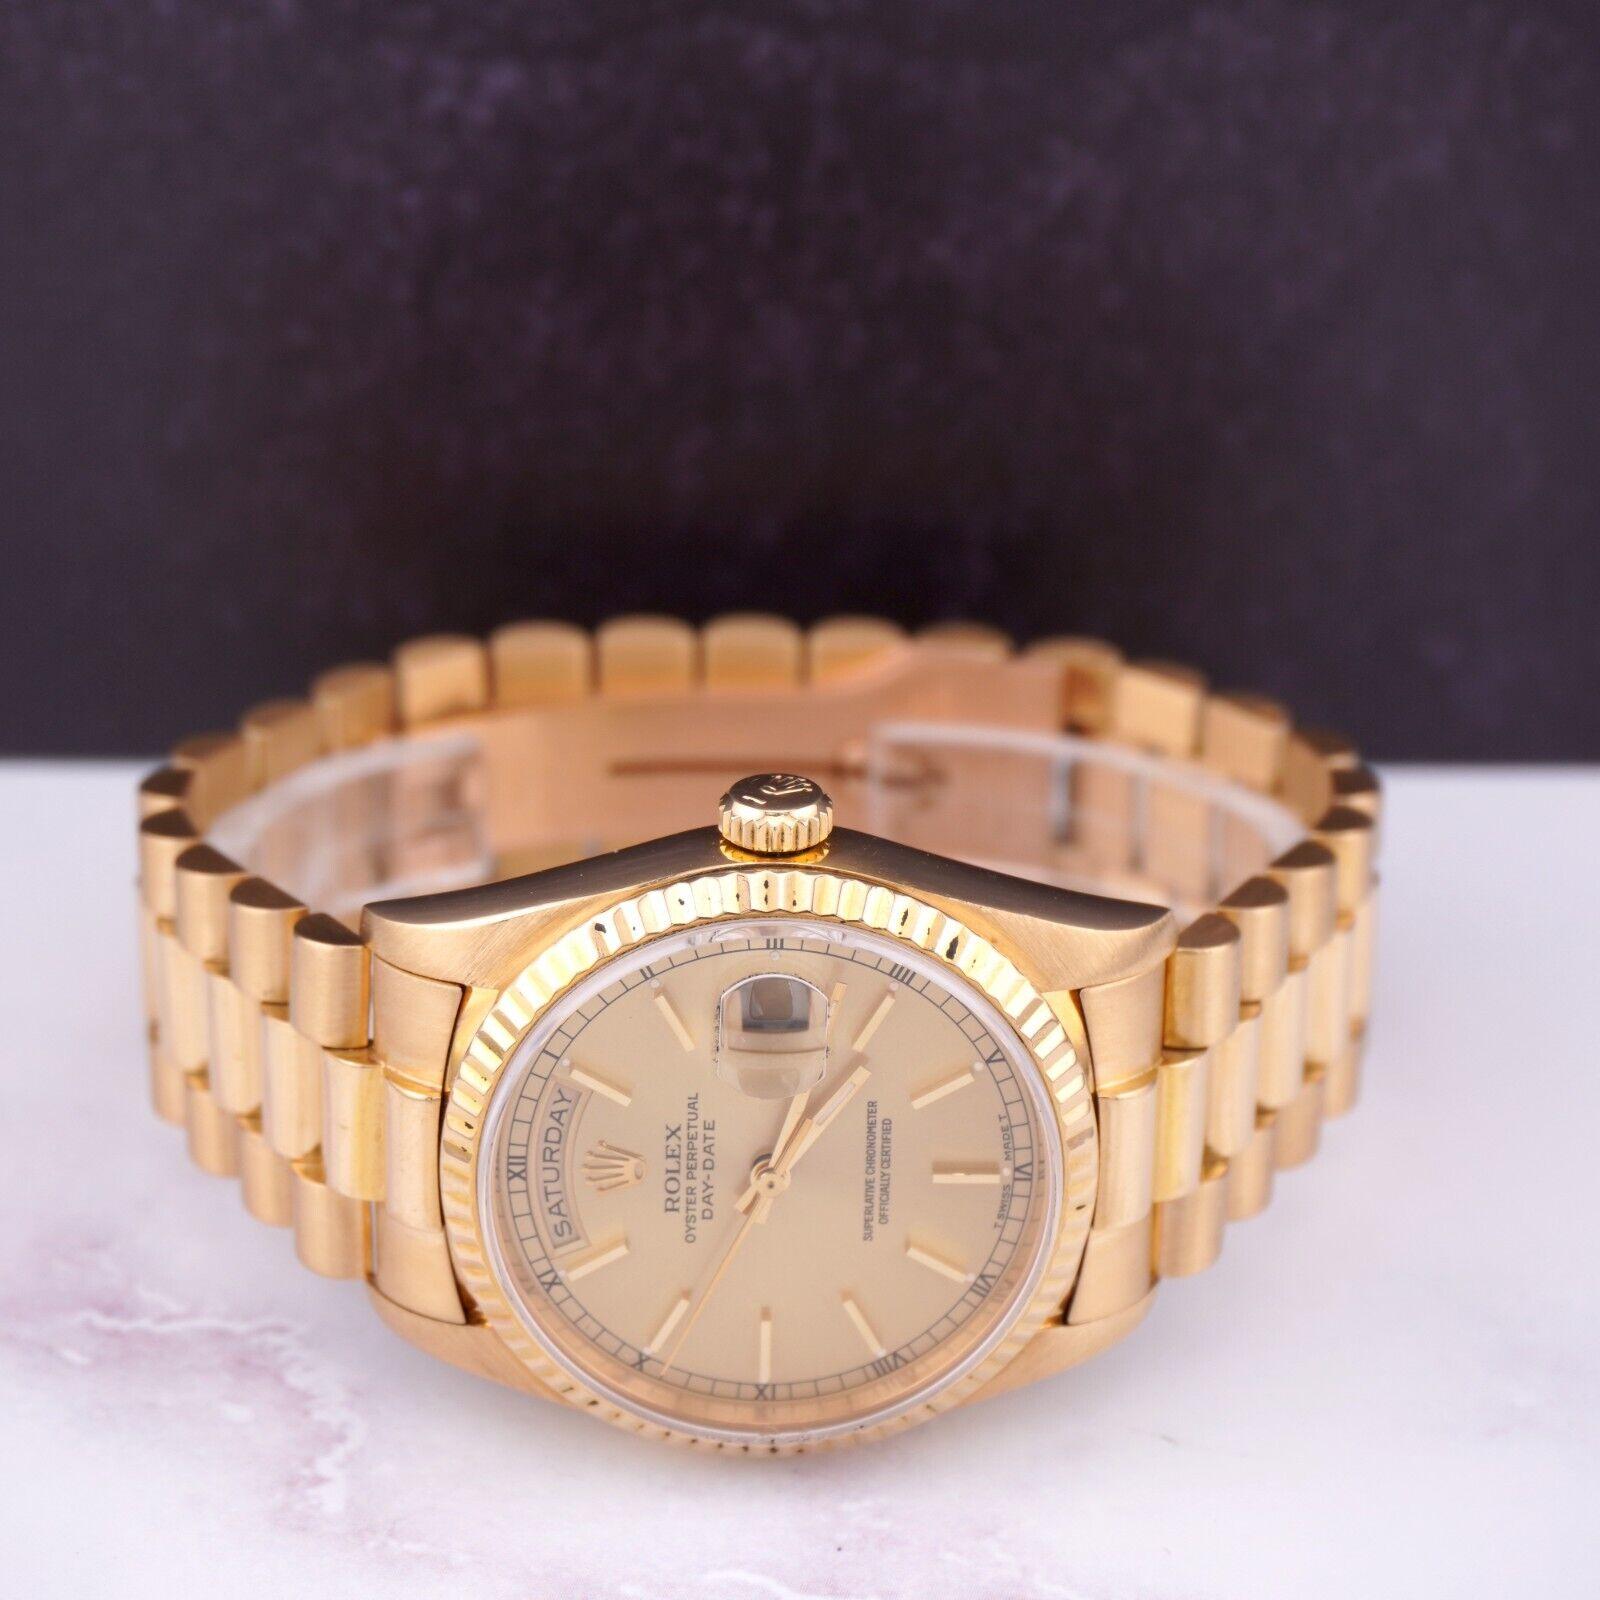 Rolex DAY-DATE 36mm 18K Yellow Gold President Men's Gold Dial Watch Ref: 18238 For Sale 2